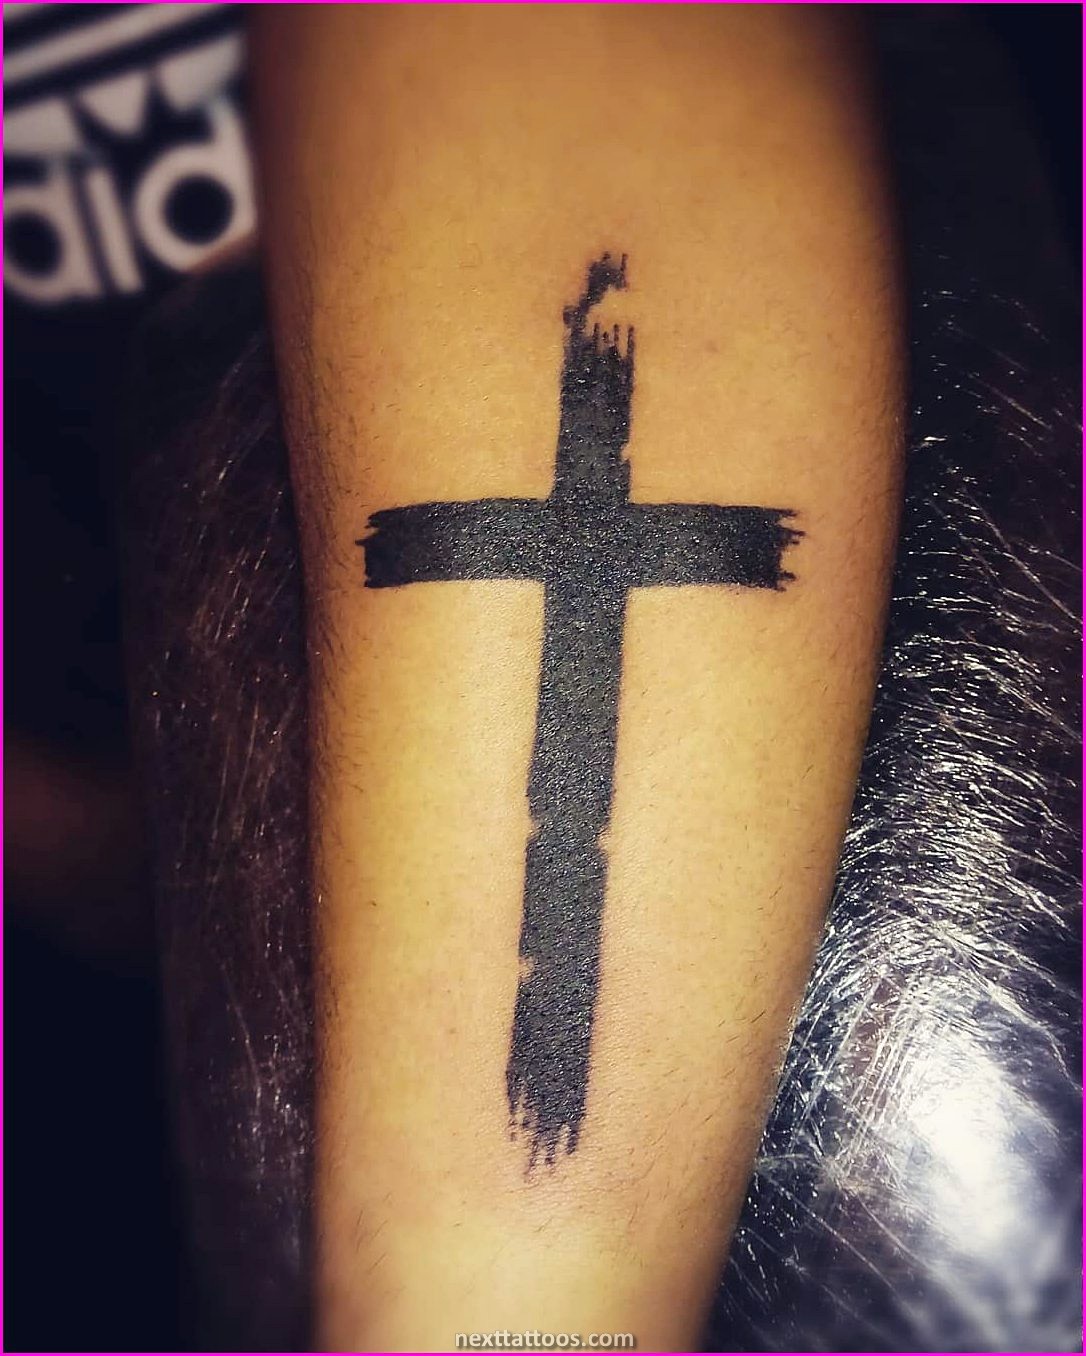 Arm Cross Tattoos - Why Arm Cross Tattoos With Clouds Are Popular